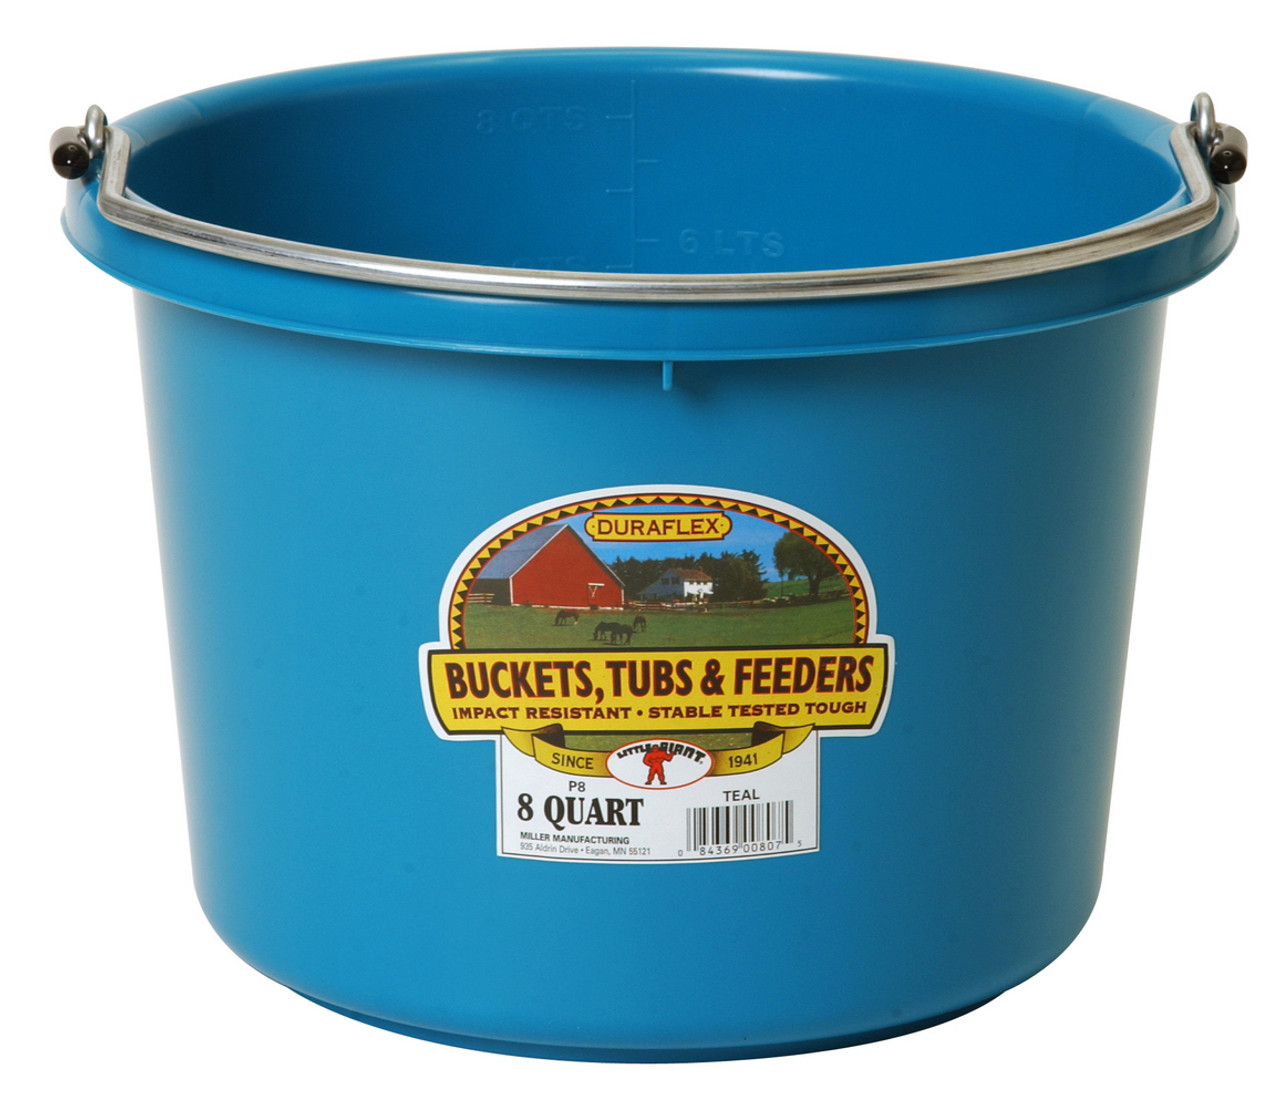 Plastic Animal Feed Bucket (Berry Blue) - Little Giant - Round Plastic Feed  Bucket with Metal Handle (8 Quarts / 2 Gallons) (Item No. P8BERRYBLUE6)